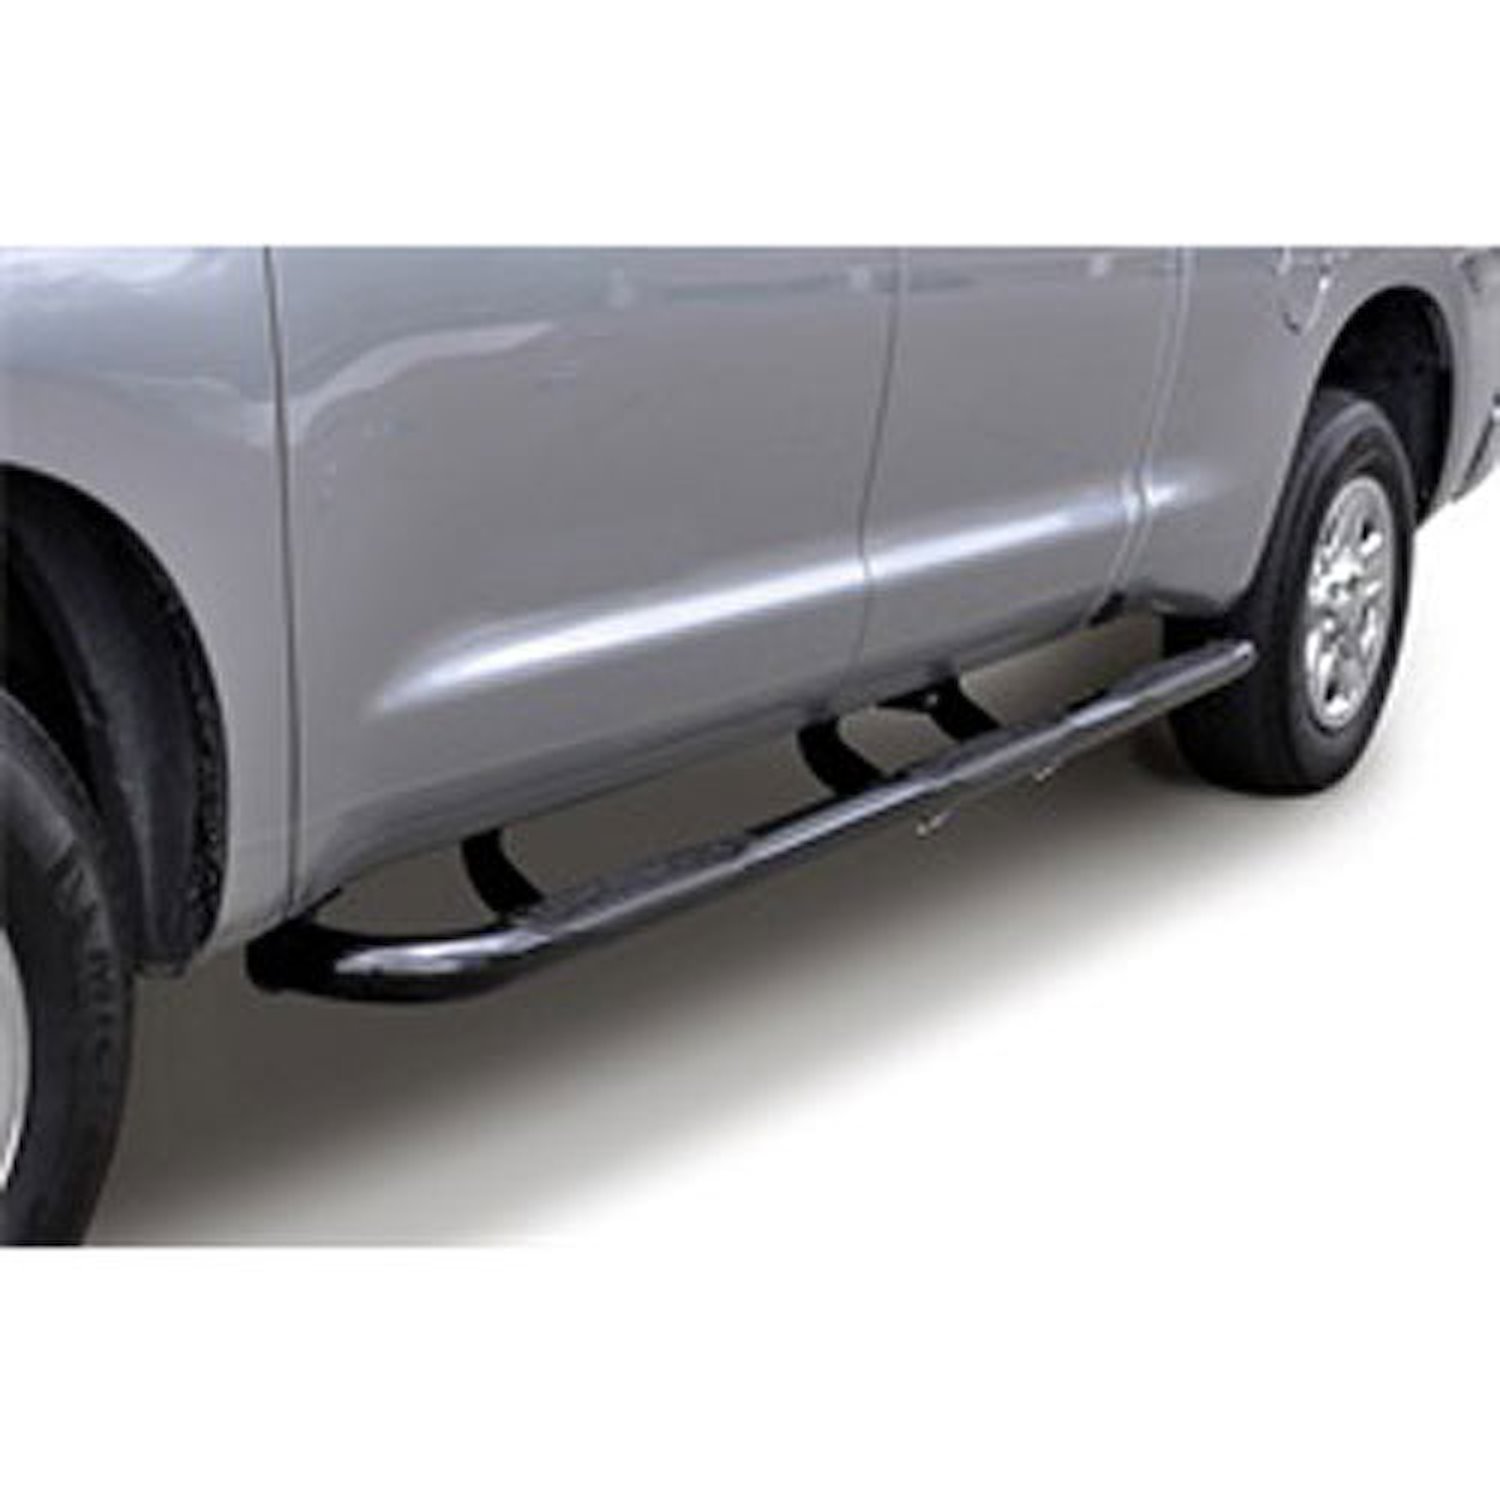 6000 Series SideSteps 2009-14 Ford F-150 78.8" Bed